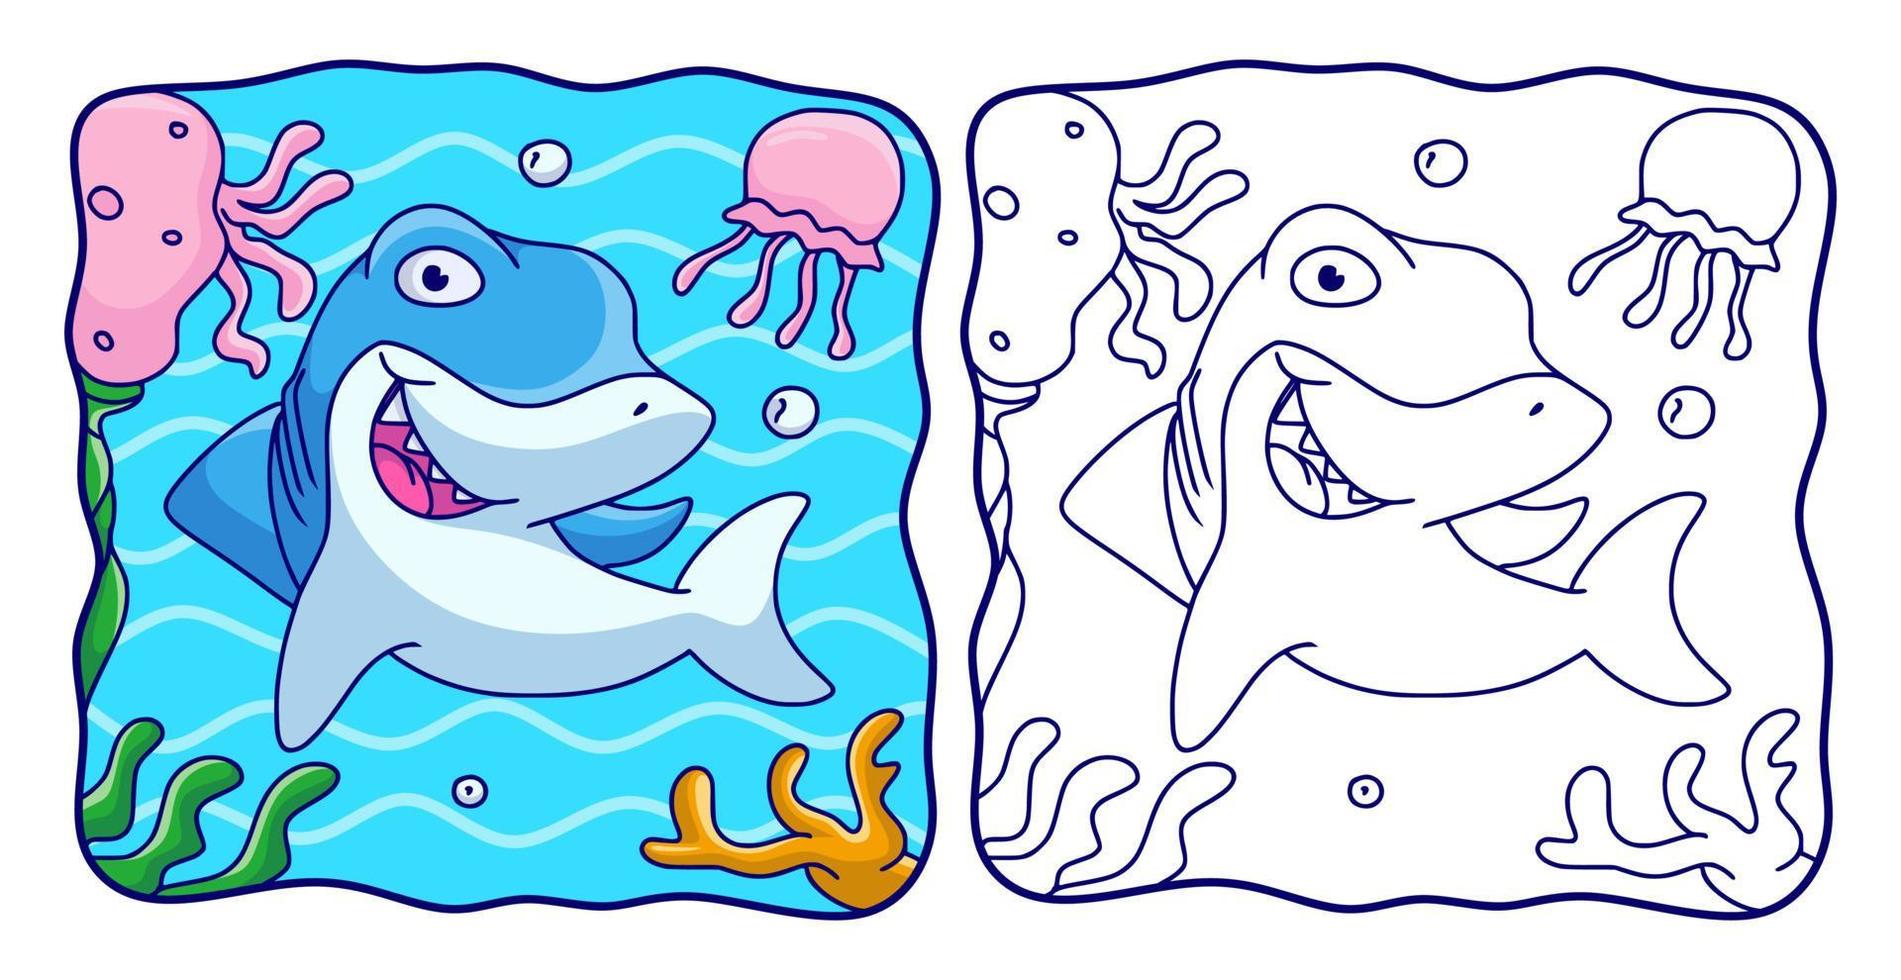 cartoon illustration sharks and jellyfish swimming coloring book or page for kids vector